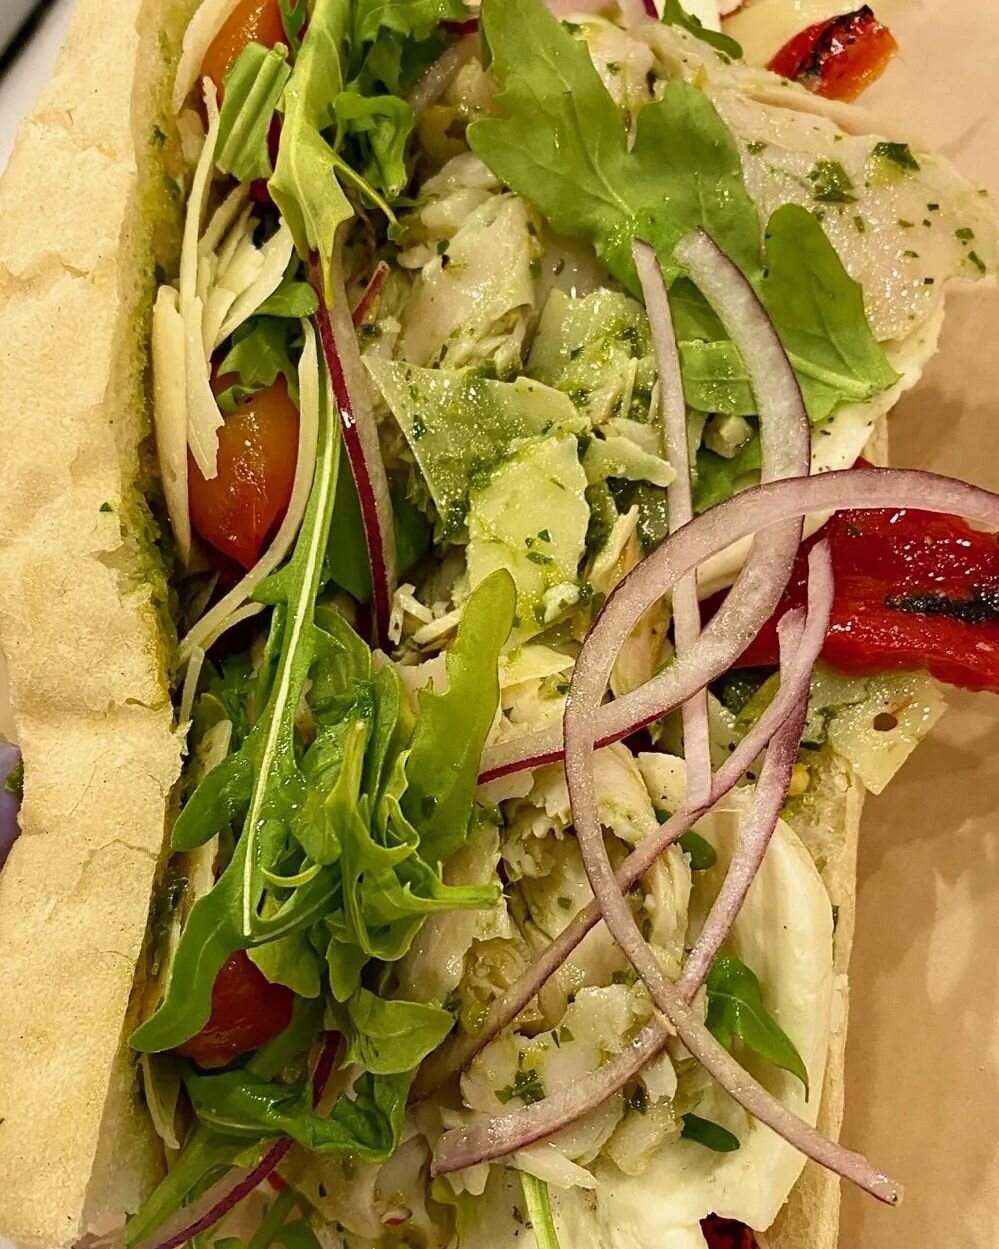 Keep checking in for rotating specials! This week we have Turkey Pesto! With mozzarella, red onion, roasted peppers, marinated tomatoes, and Arugula, served on baguette! #rvaeats #rvalunch #rvadowntown